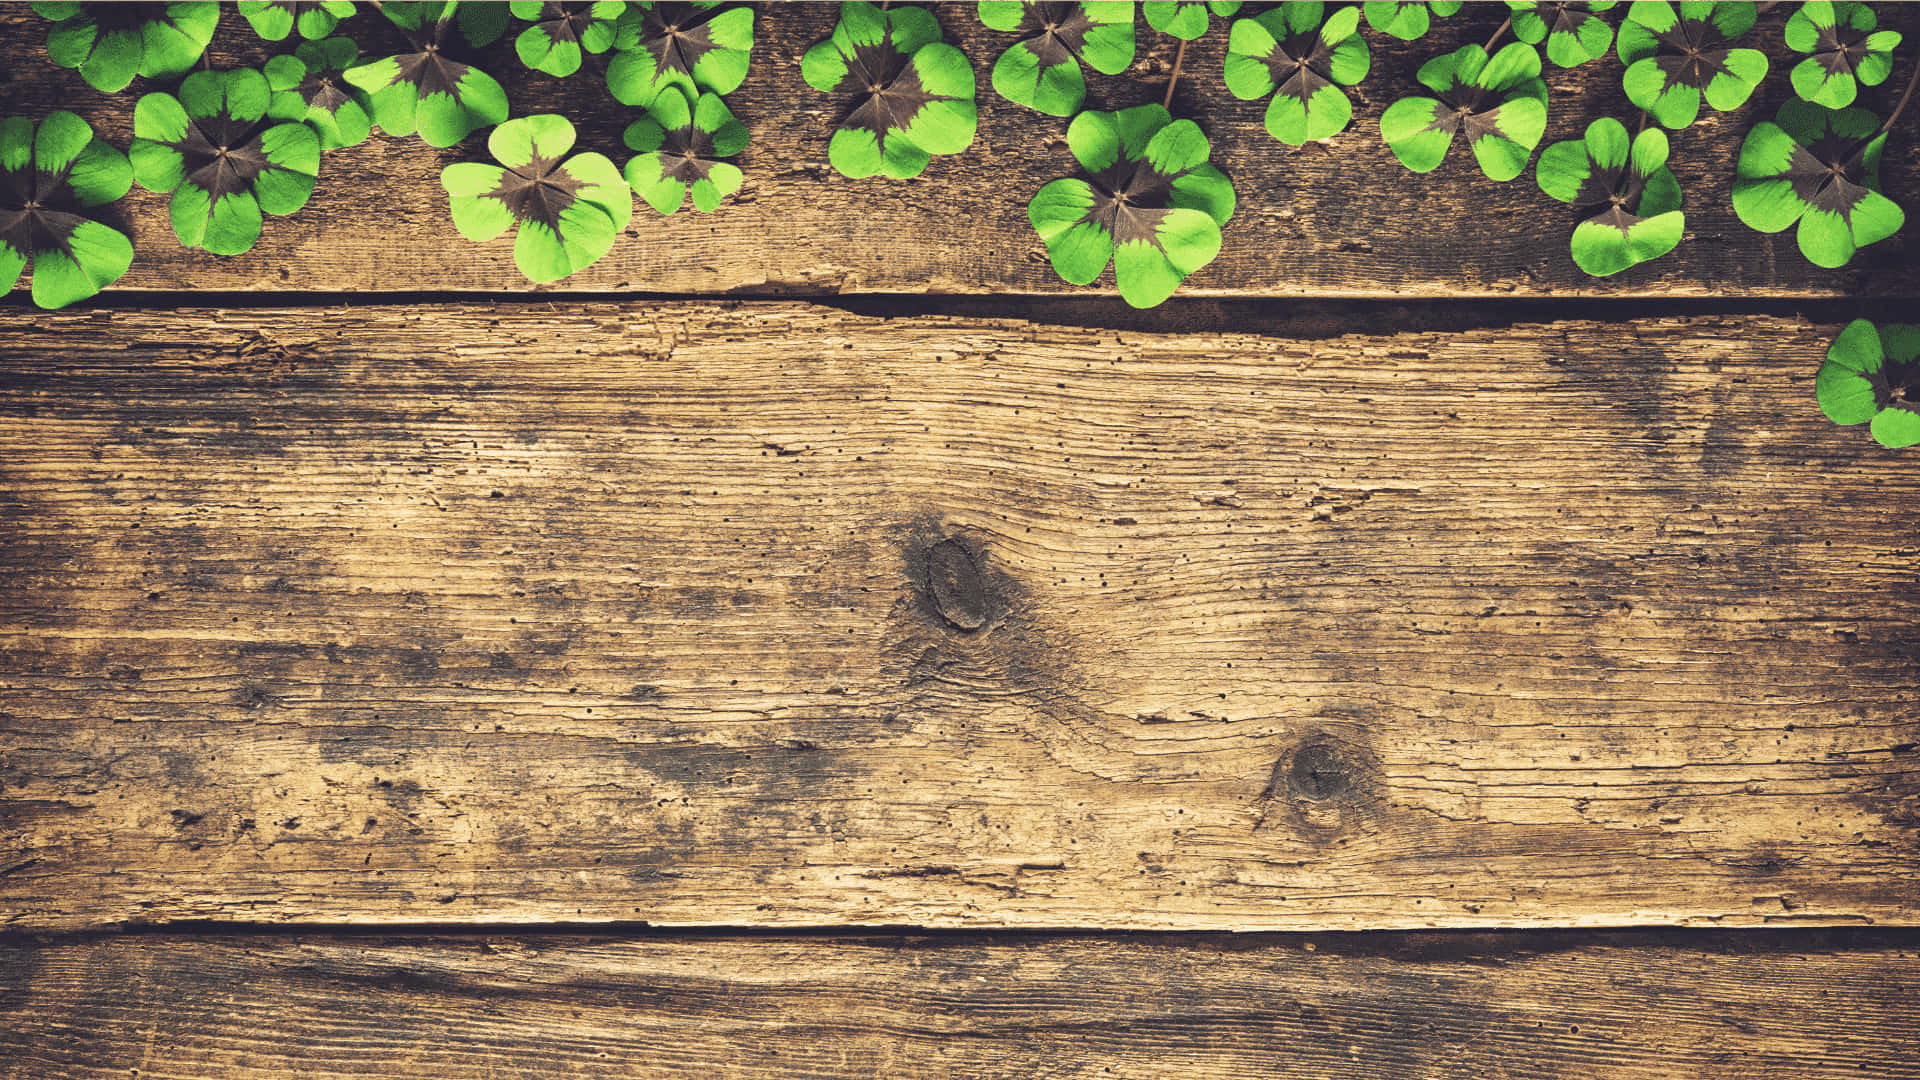 A Wooden Background With Green Leaves